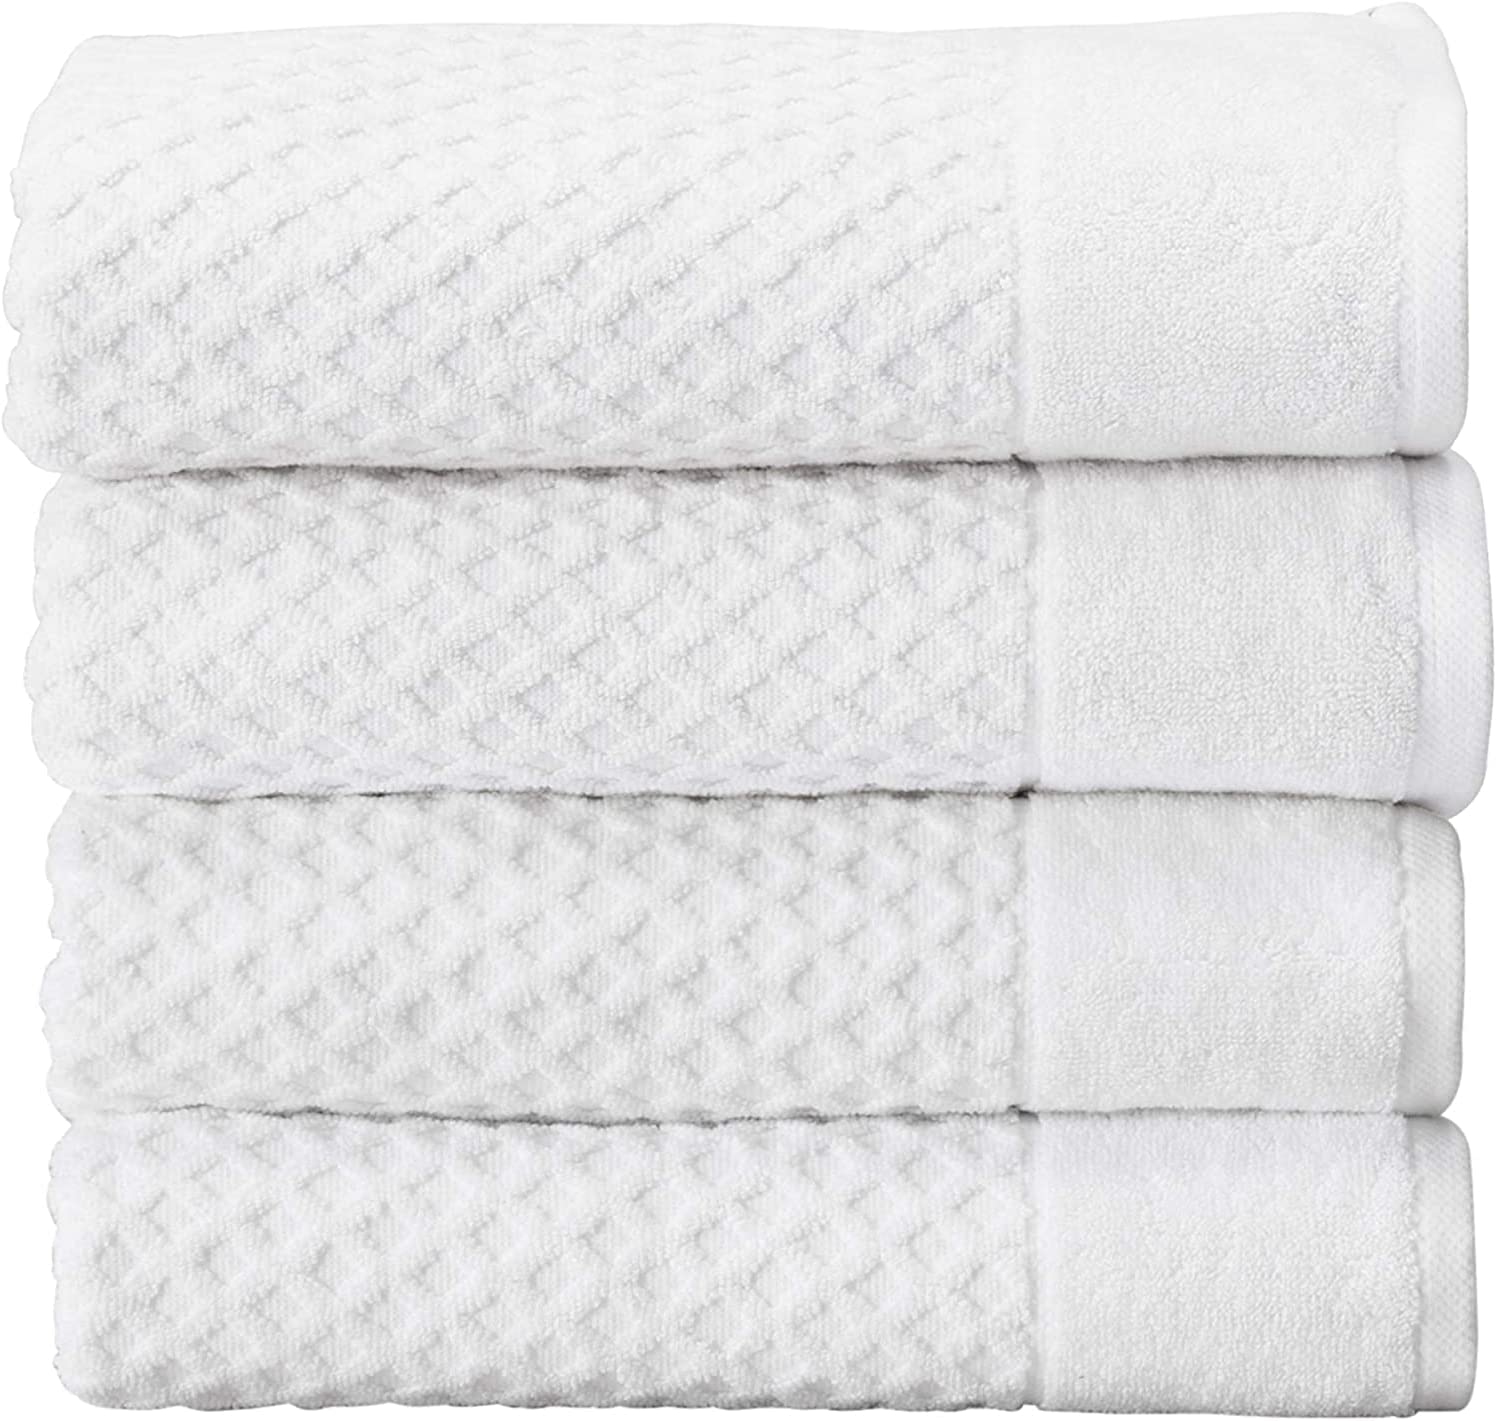 COTTON CRAFT- Euro Spa Set of 4 Luxury Waffle Weave Bath Towels, Oversized  Pure Ringspun Cotton, 30 inch x 56 inch, White 4 Pack Bath Towel White